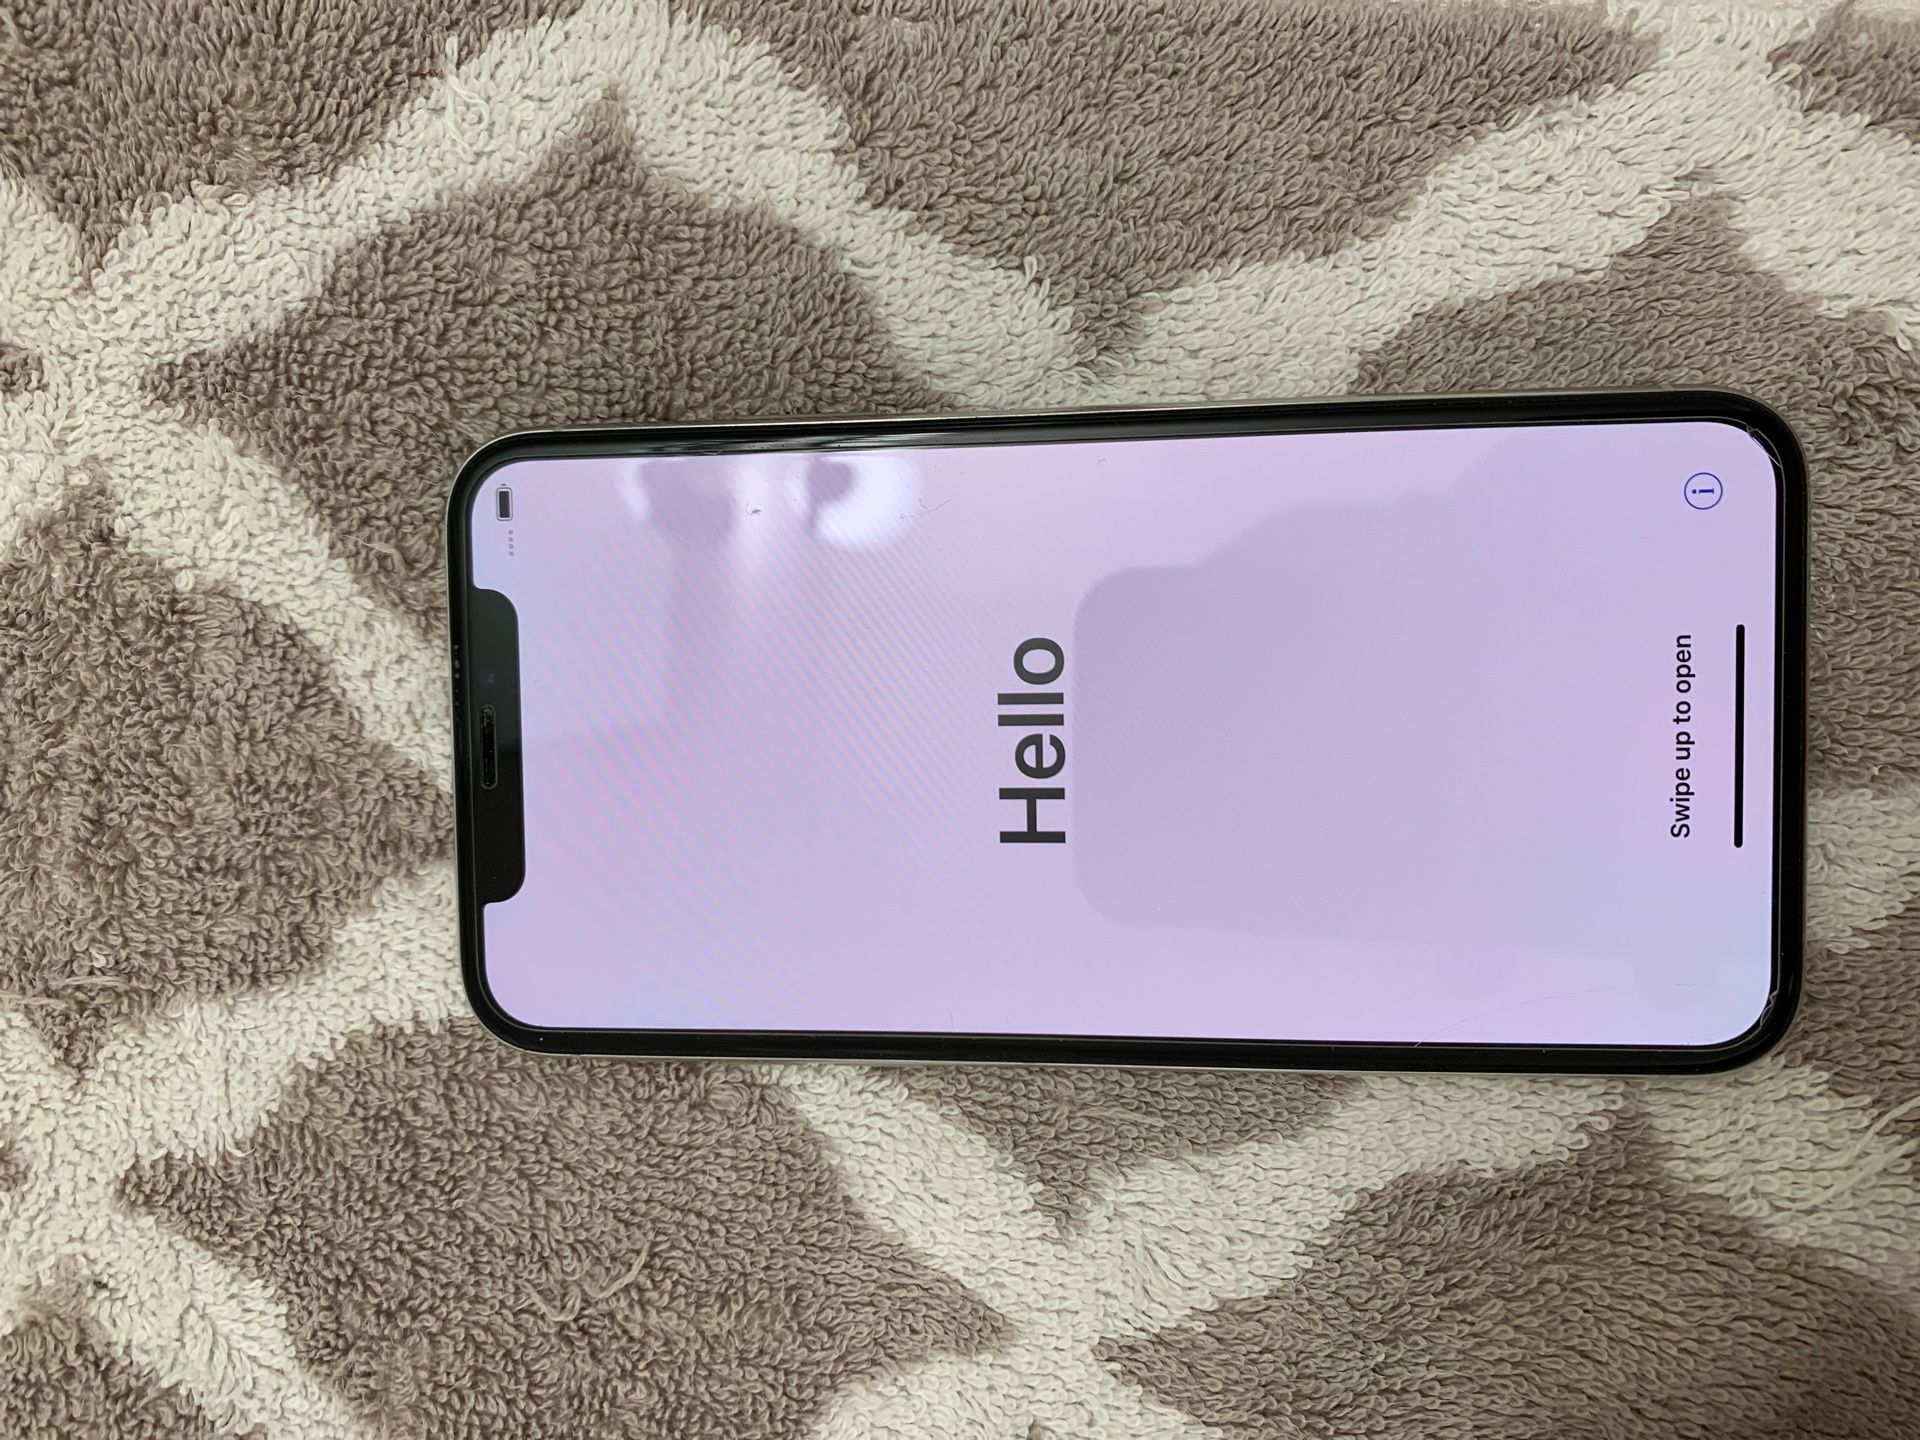 iPhone X silver 256 gb - great condition unlocked